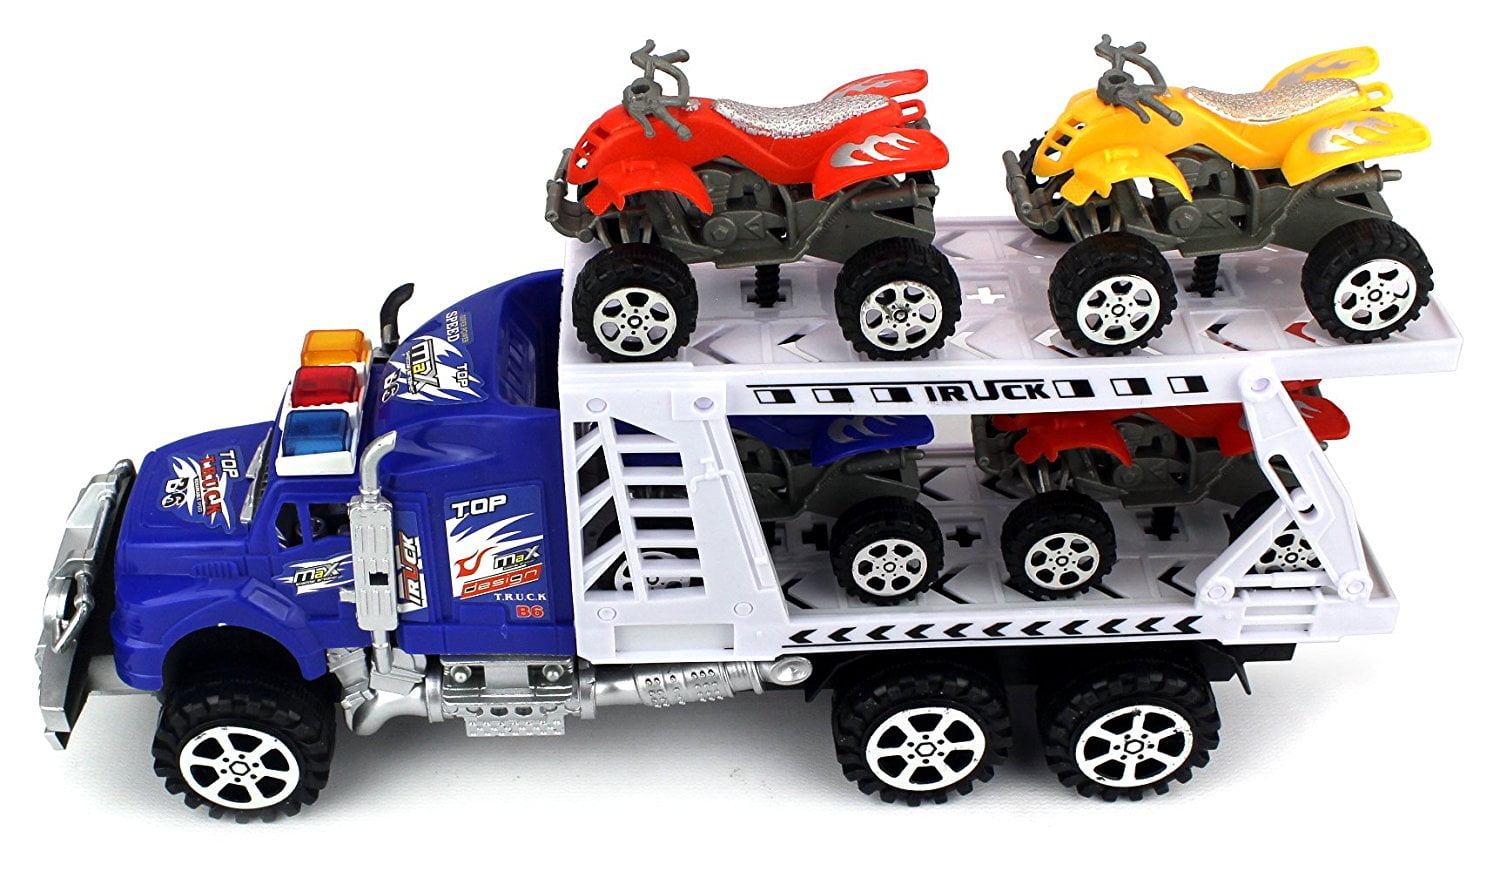 No Batteries Required Colors May Vary ATV Transporter Trailer Childrens Friction Toy Truck Ready to Run w/ 4 Toy ATVs 